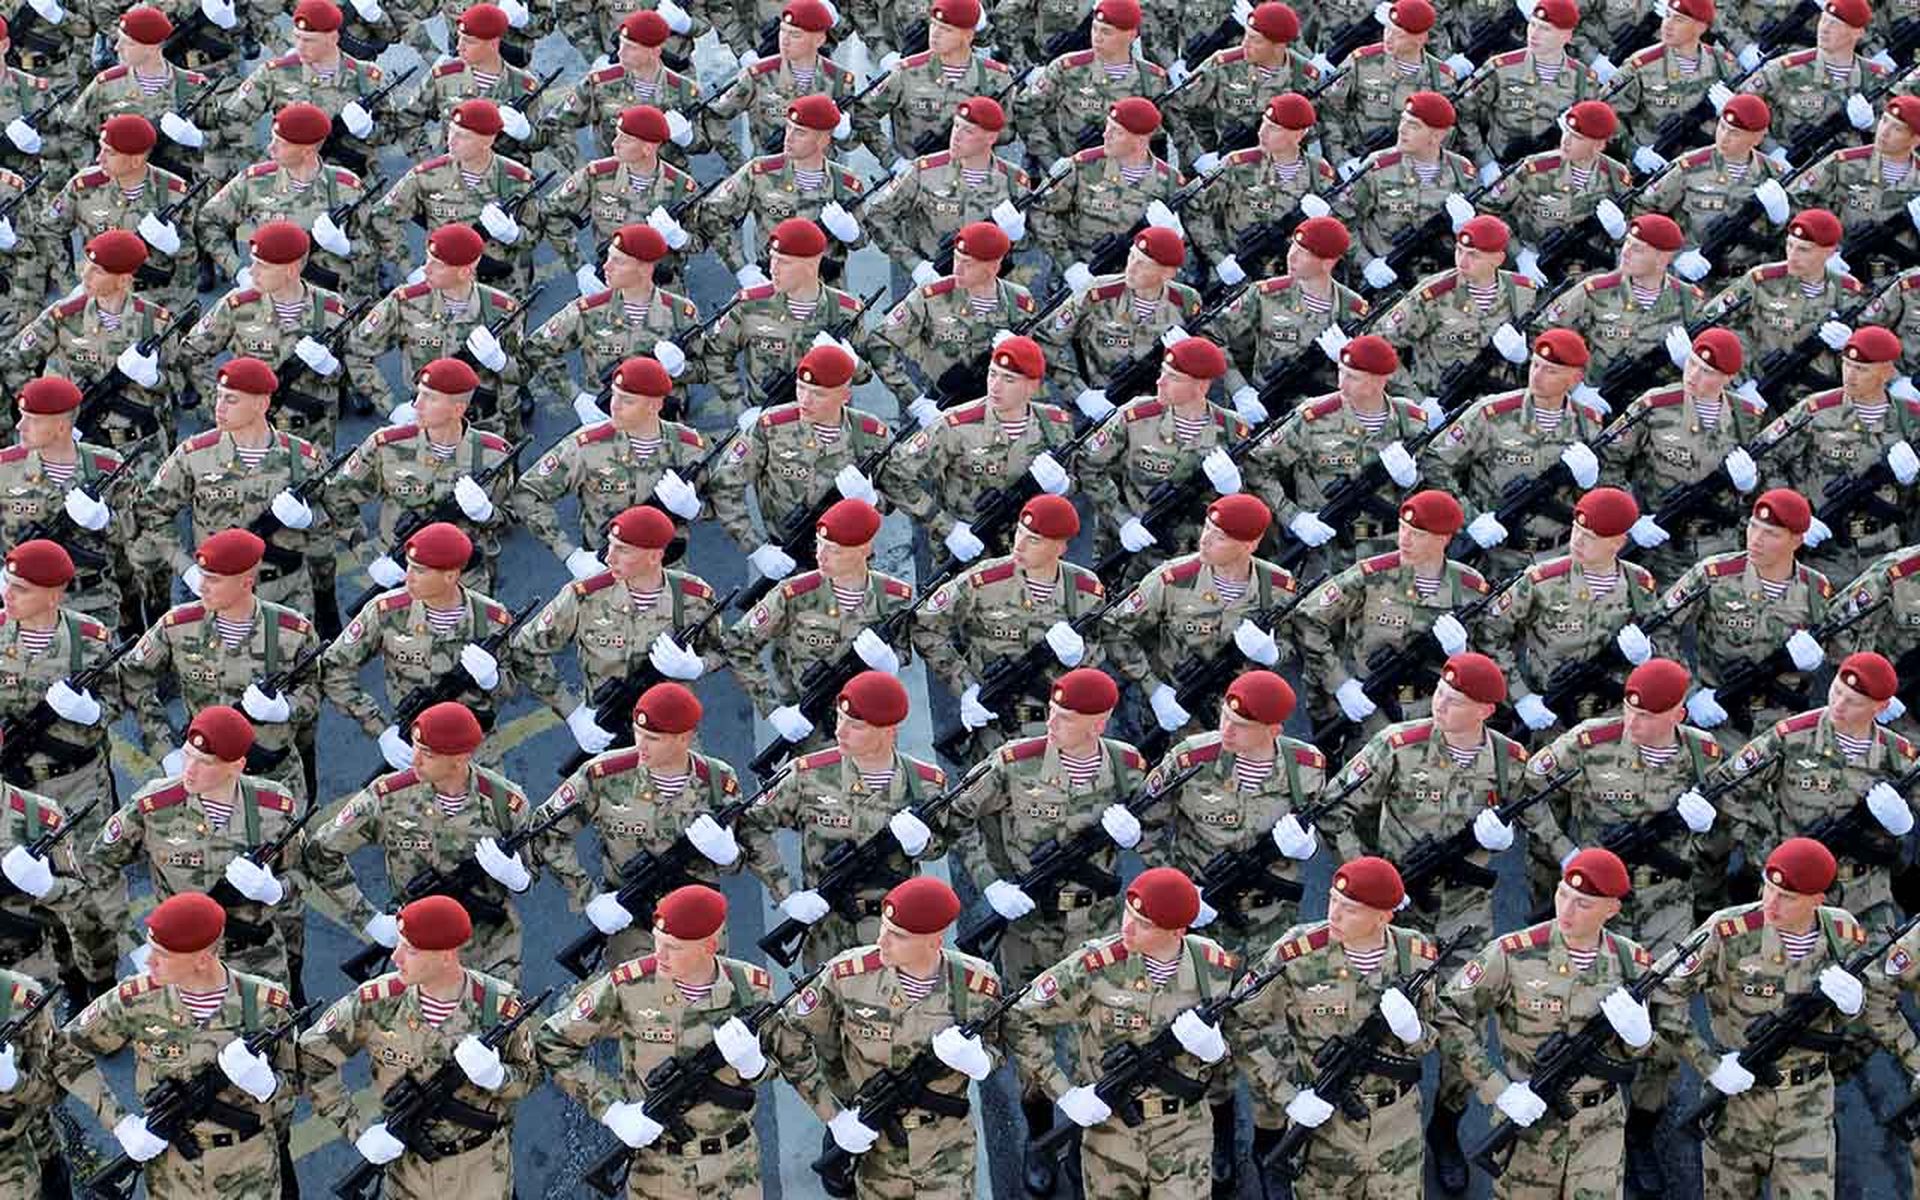 Russian soldiers march in formation during a military parade rehearsal.